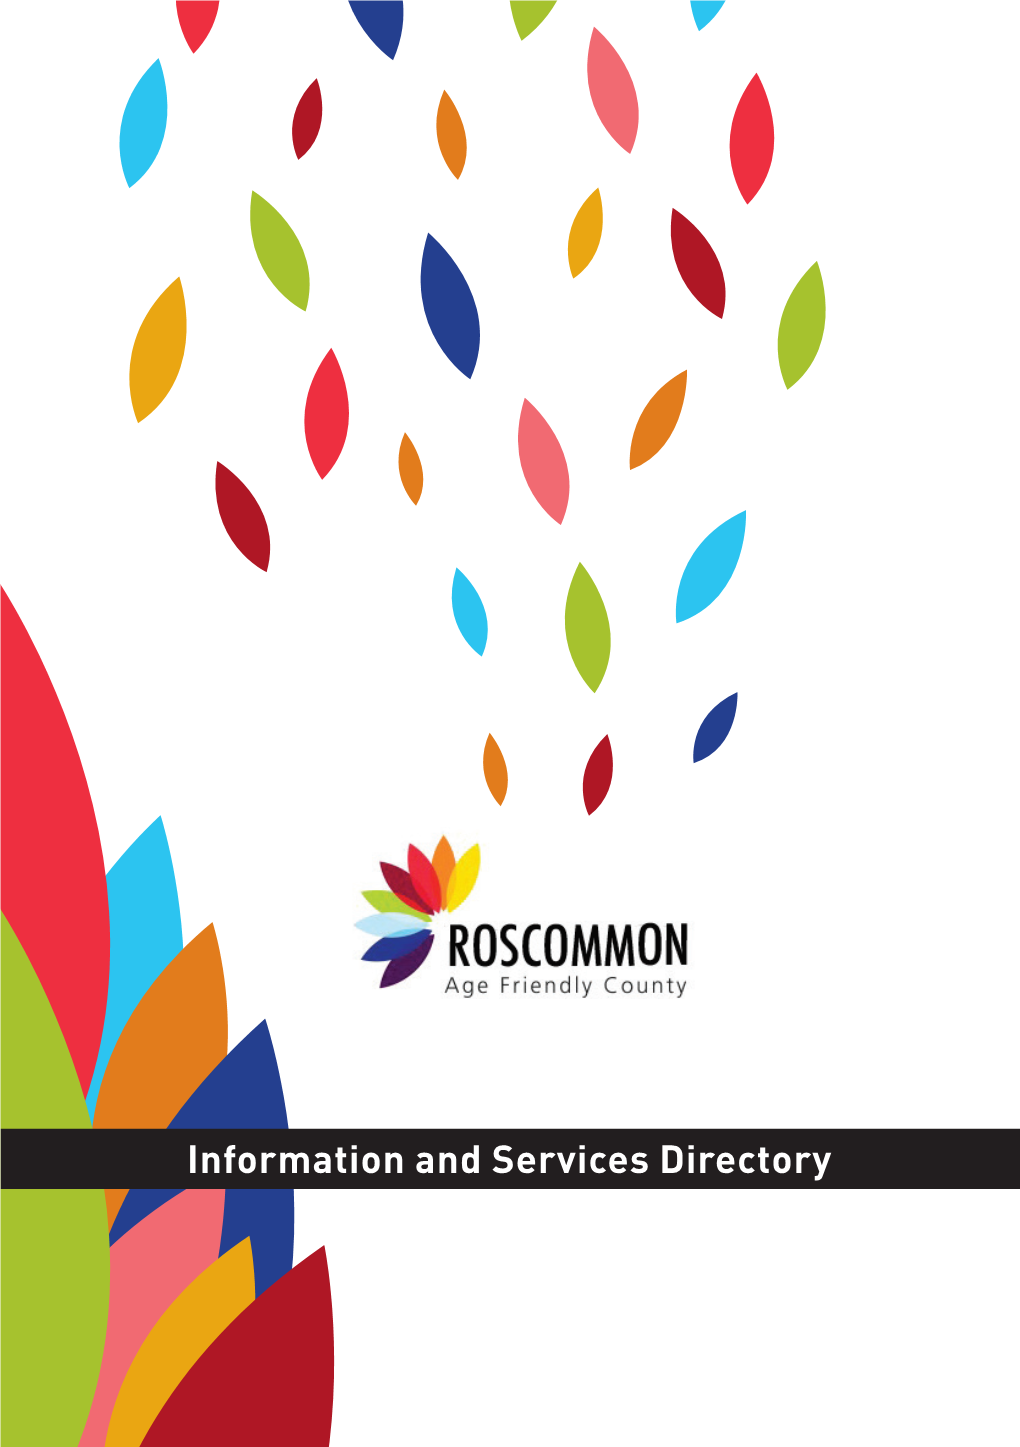 Information and Services Directory